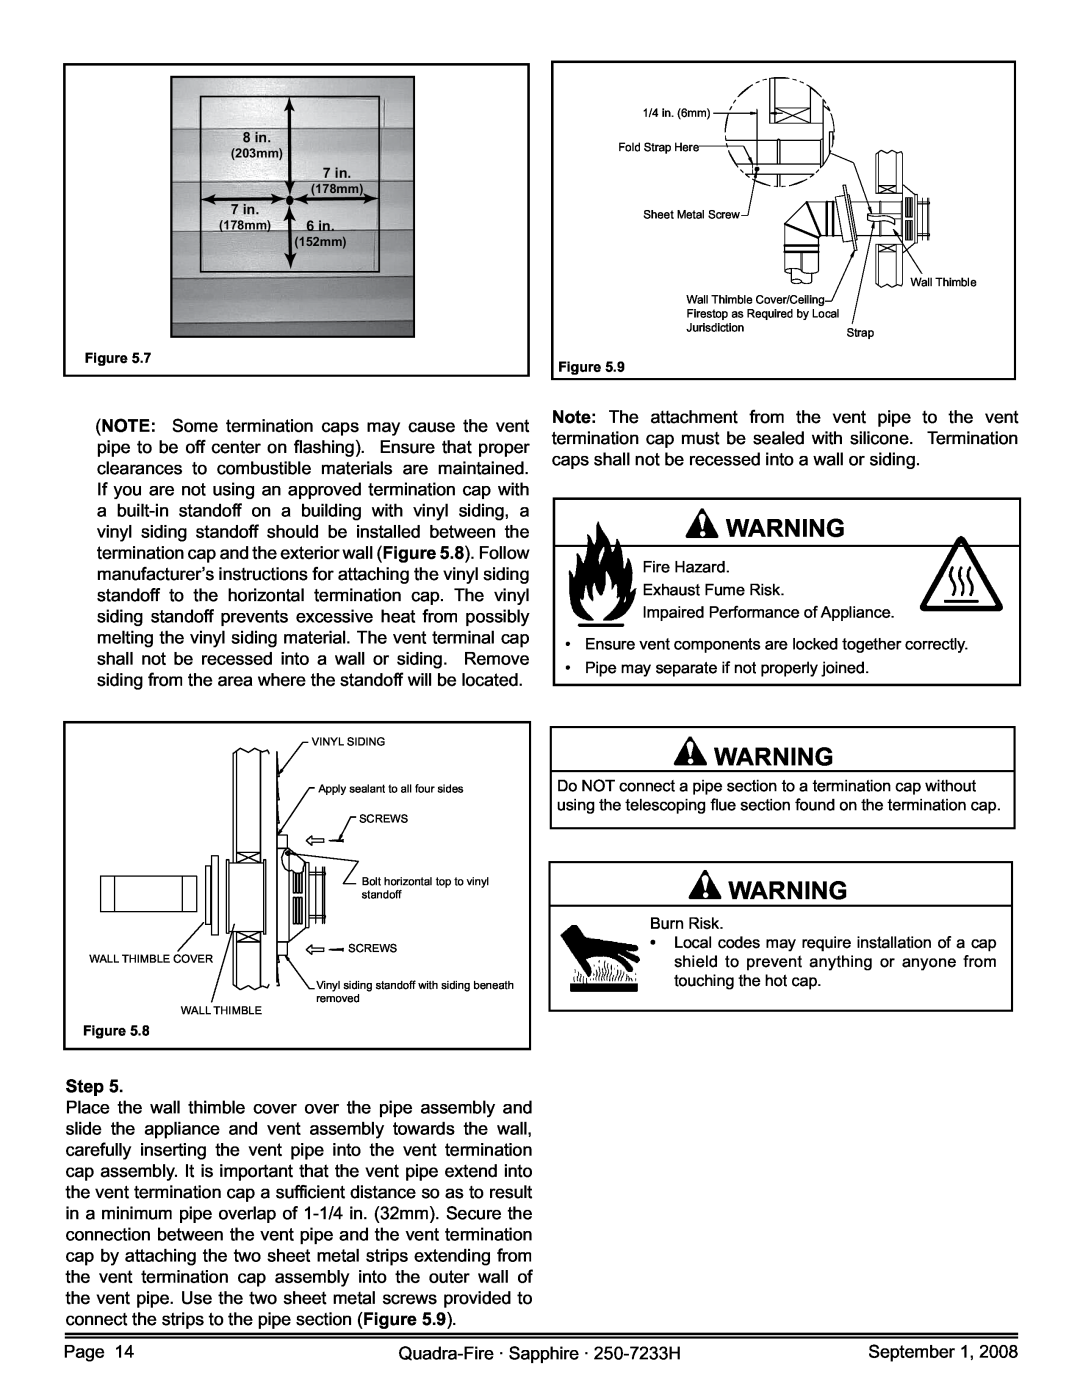 Hearth and Home Technologies SAPPH-D-CSB, 839-1390, 839-1440, 839-1460, SAPPH-D-CWL owner manual Step, 203mm, 178mm, 152mm 